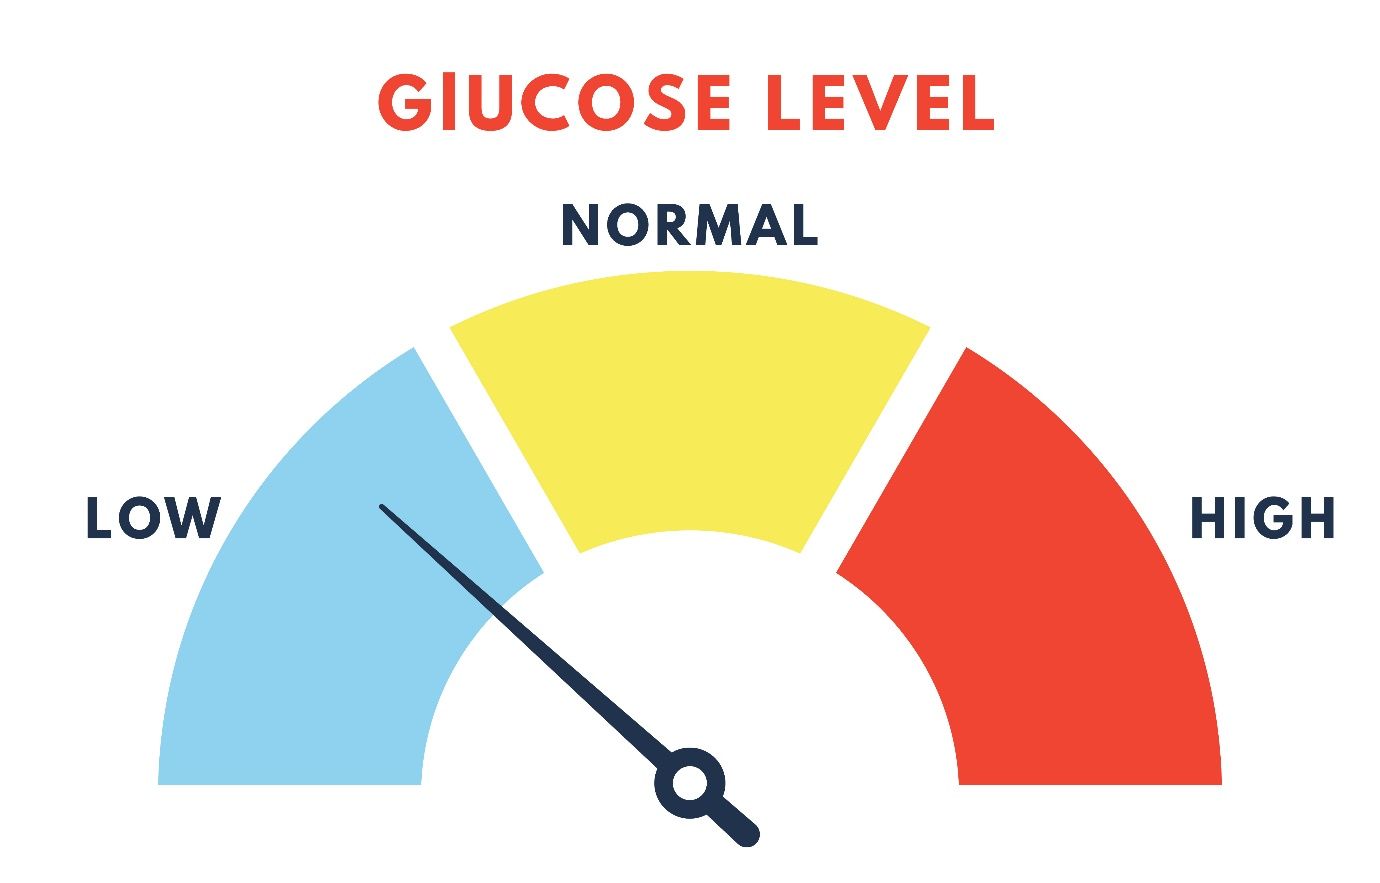 Blood glucose below 54 mg/dL is severe hypoglycemia that can lead to seizures or unconsciousness.